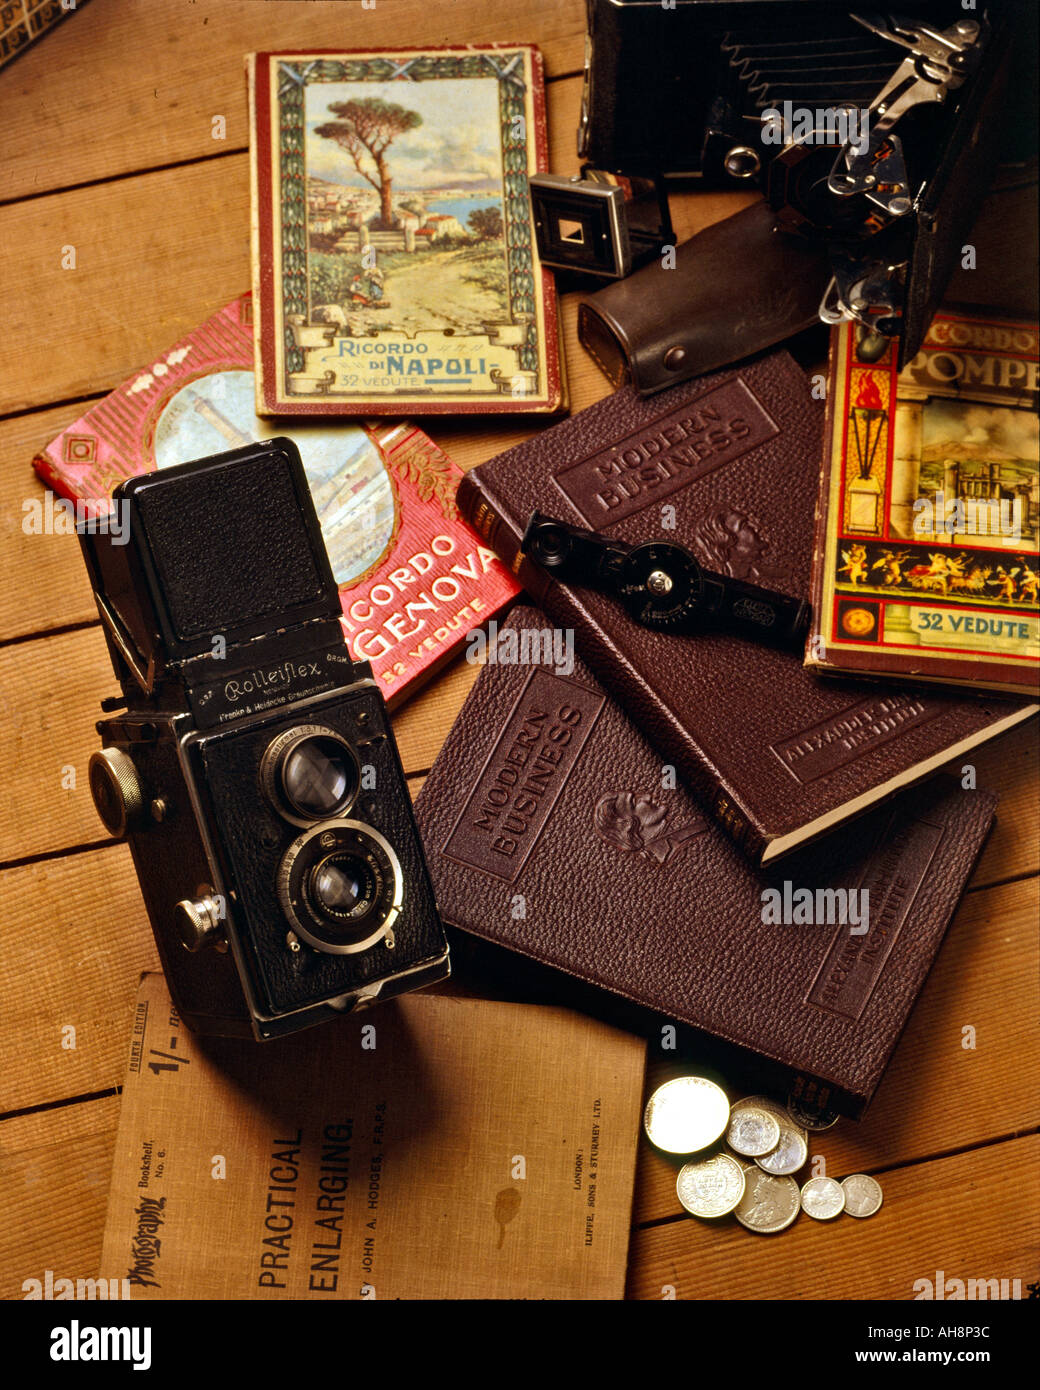 AAD71572 Rolleiflex Camera First TLR Evolution of Photography Stock Photo